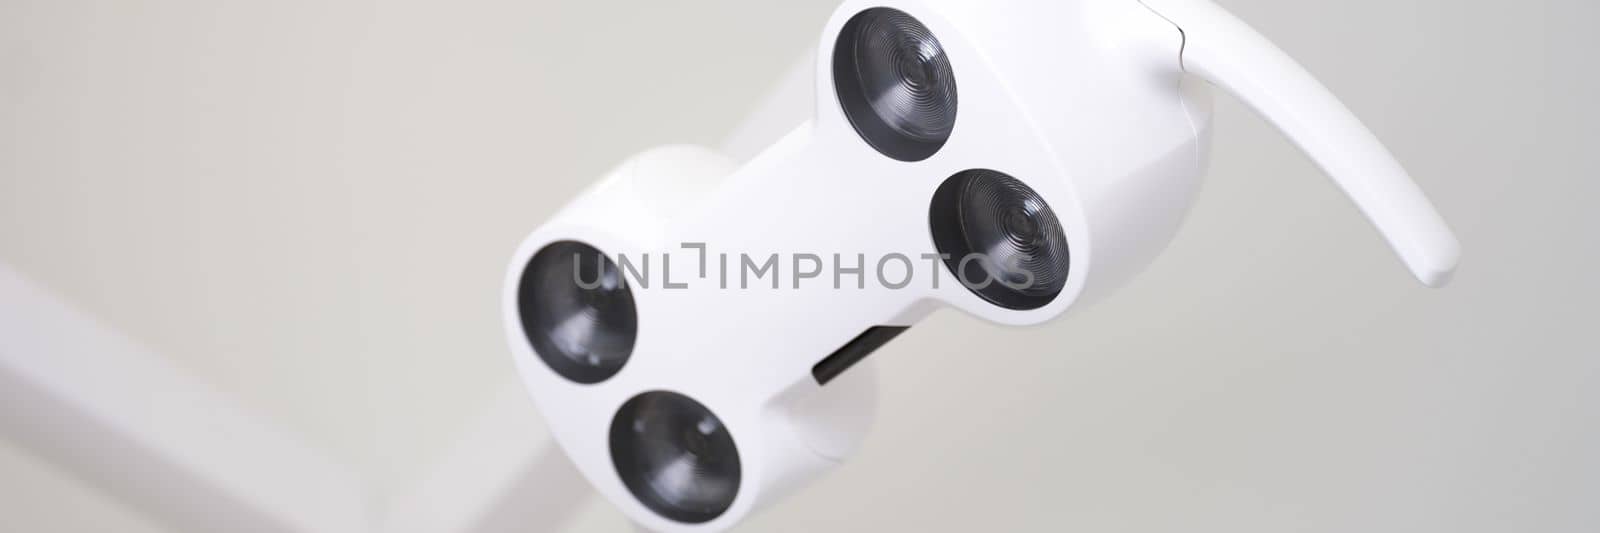 Black and white modern lamp in dental office. Services and equipment of the dental clinic